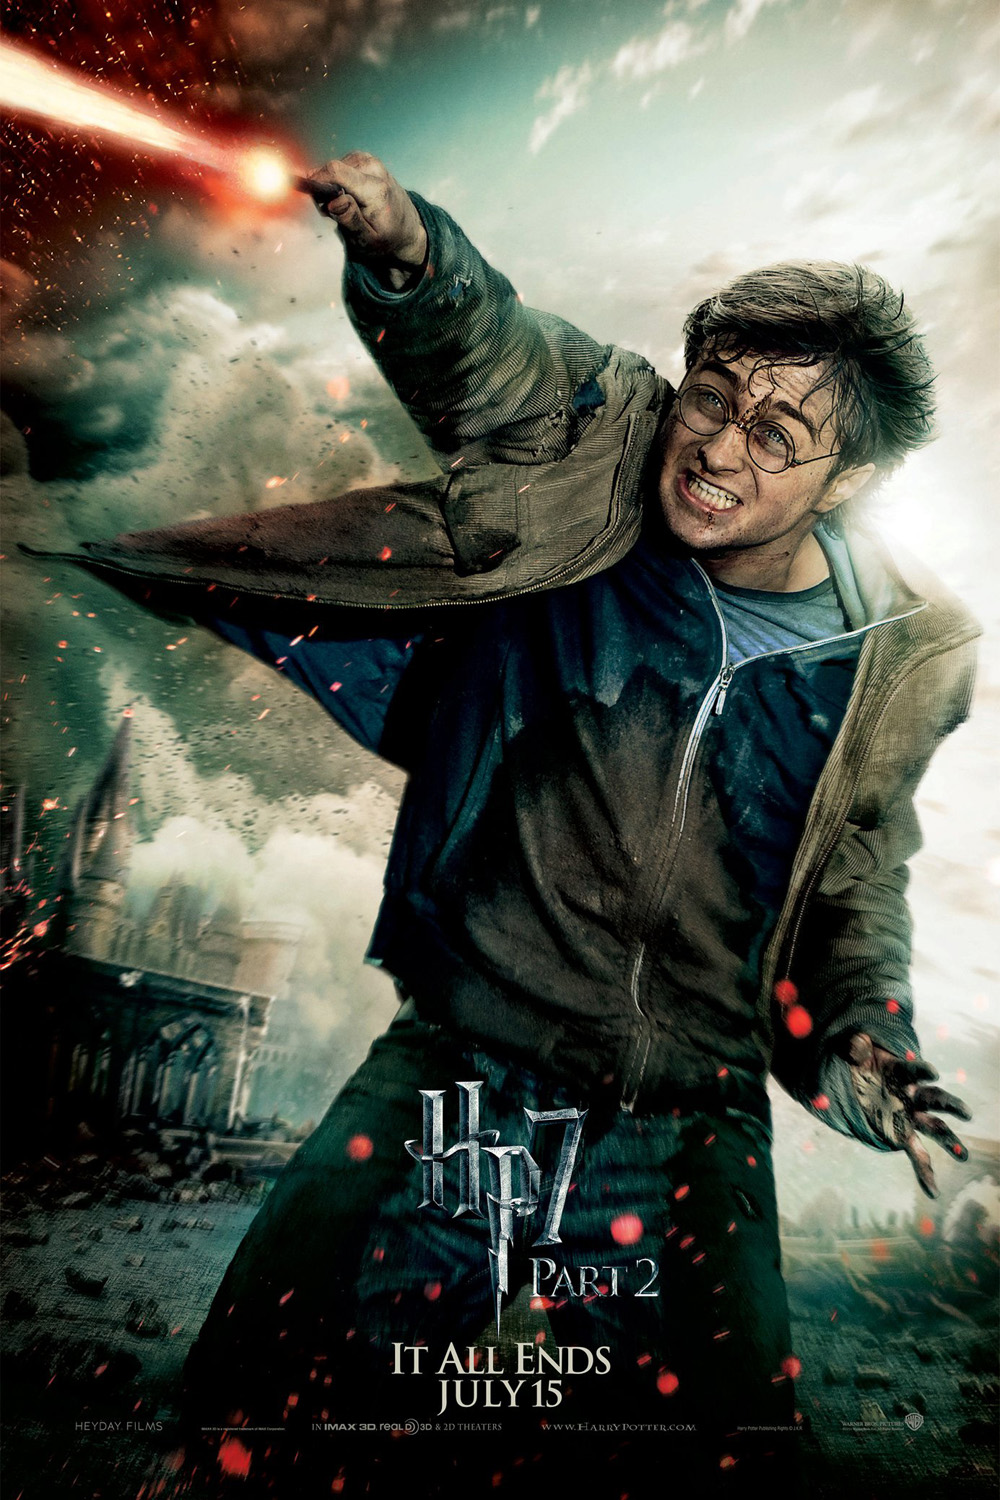 Poster for Harry Potter and the Deathly Hallows - Part 2